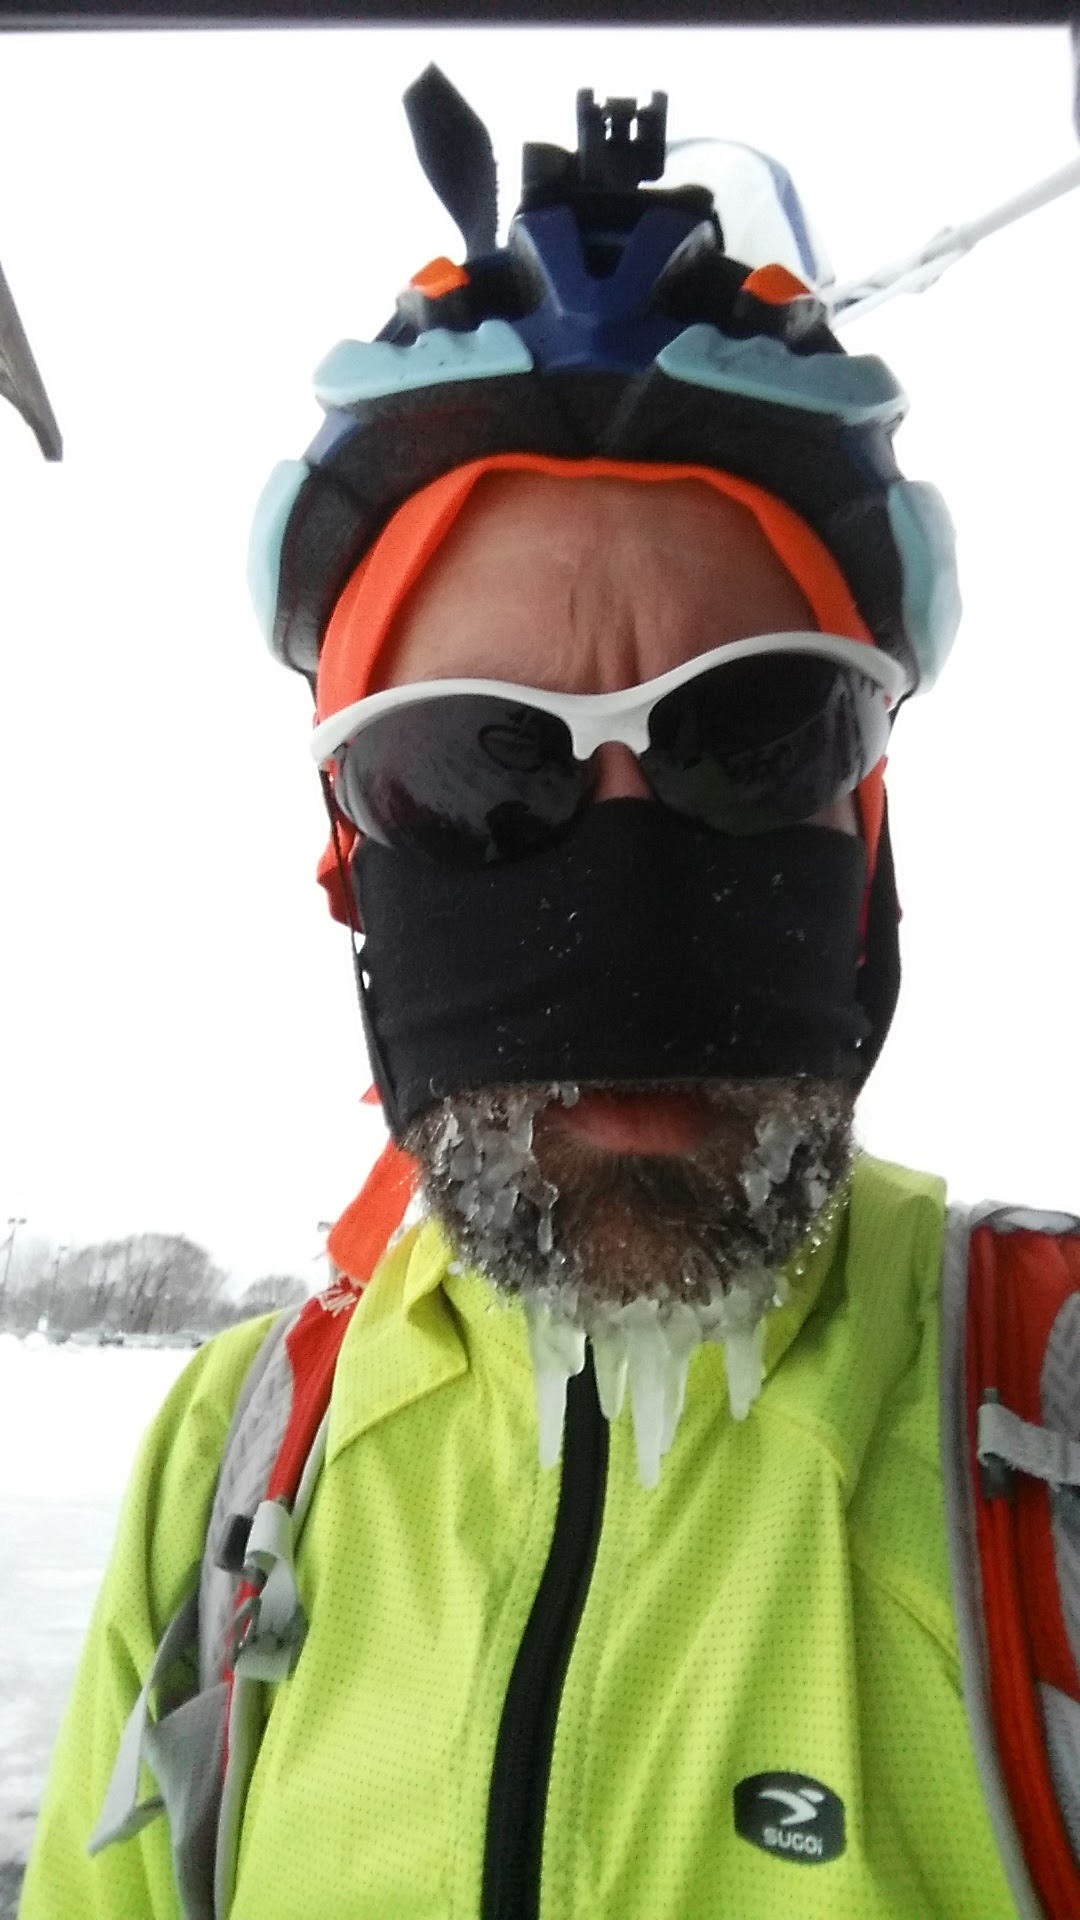 Mid-ride ice beard today 12/28 finishing out the Festive 500 with a 79 miler on the mtb and fat bike.